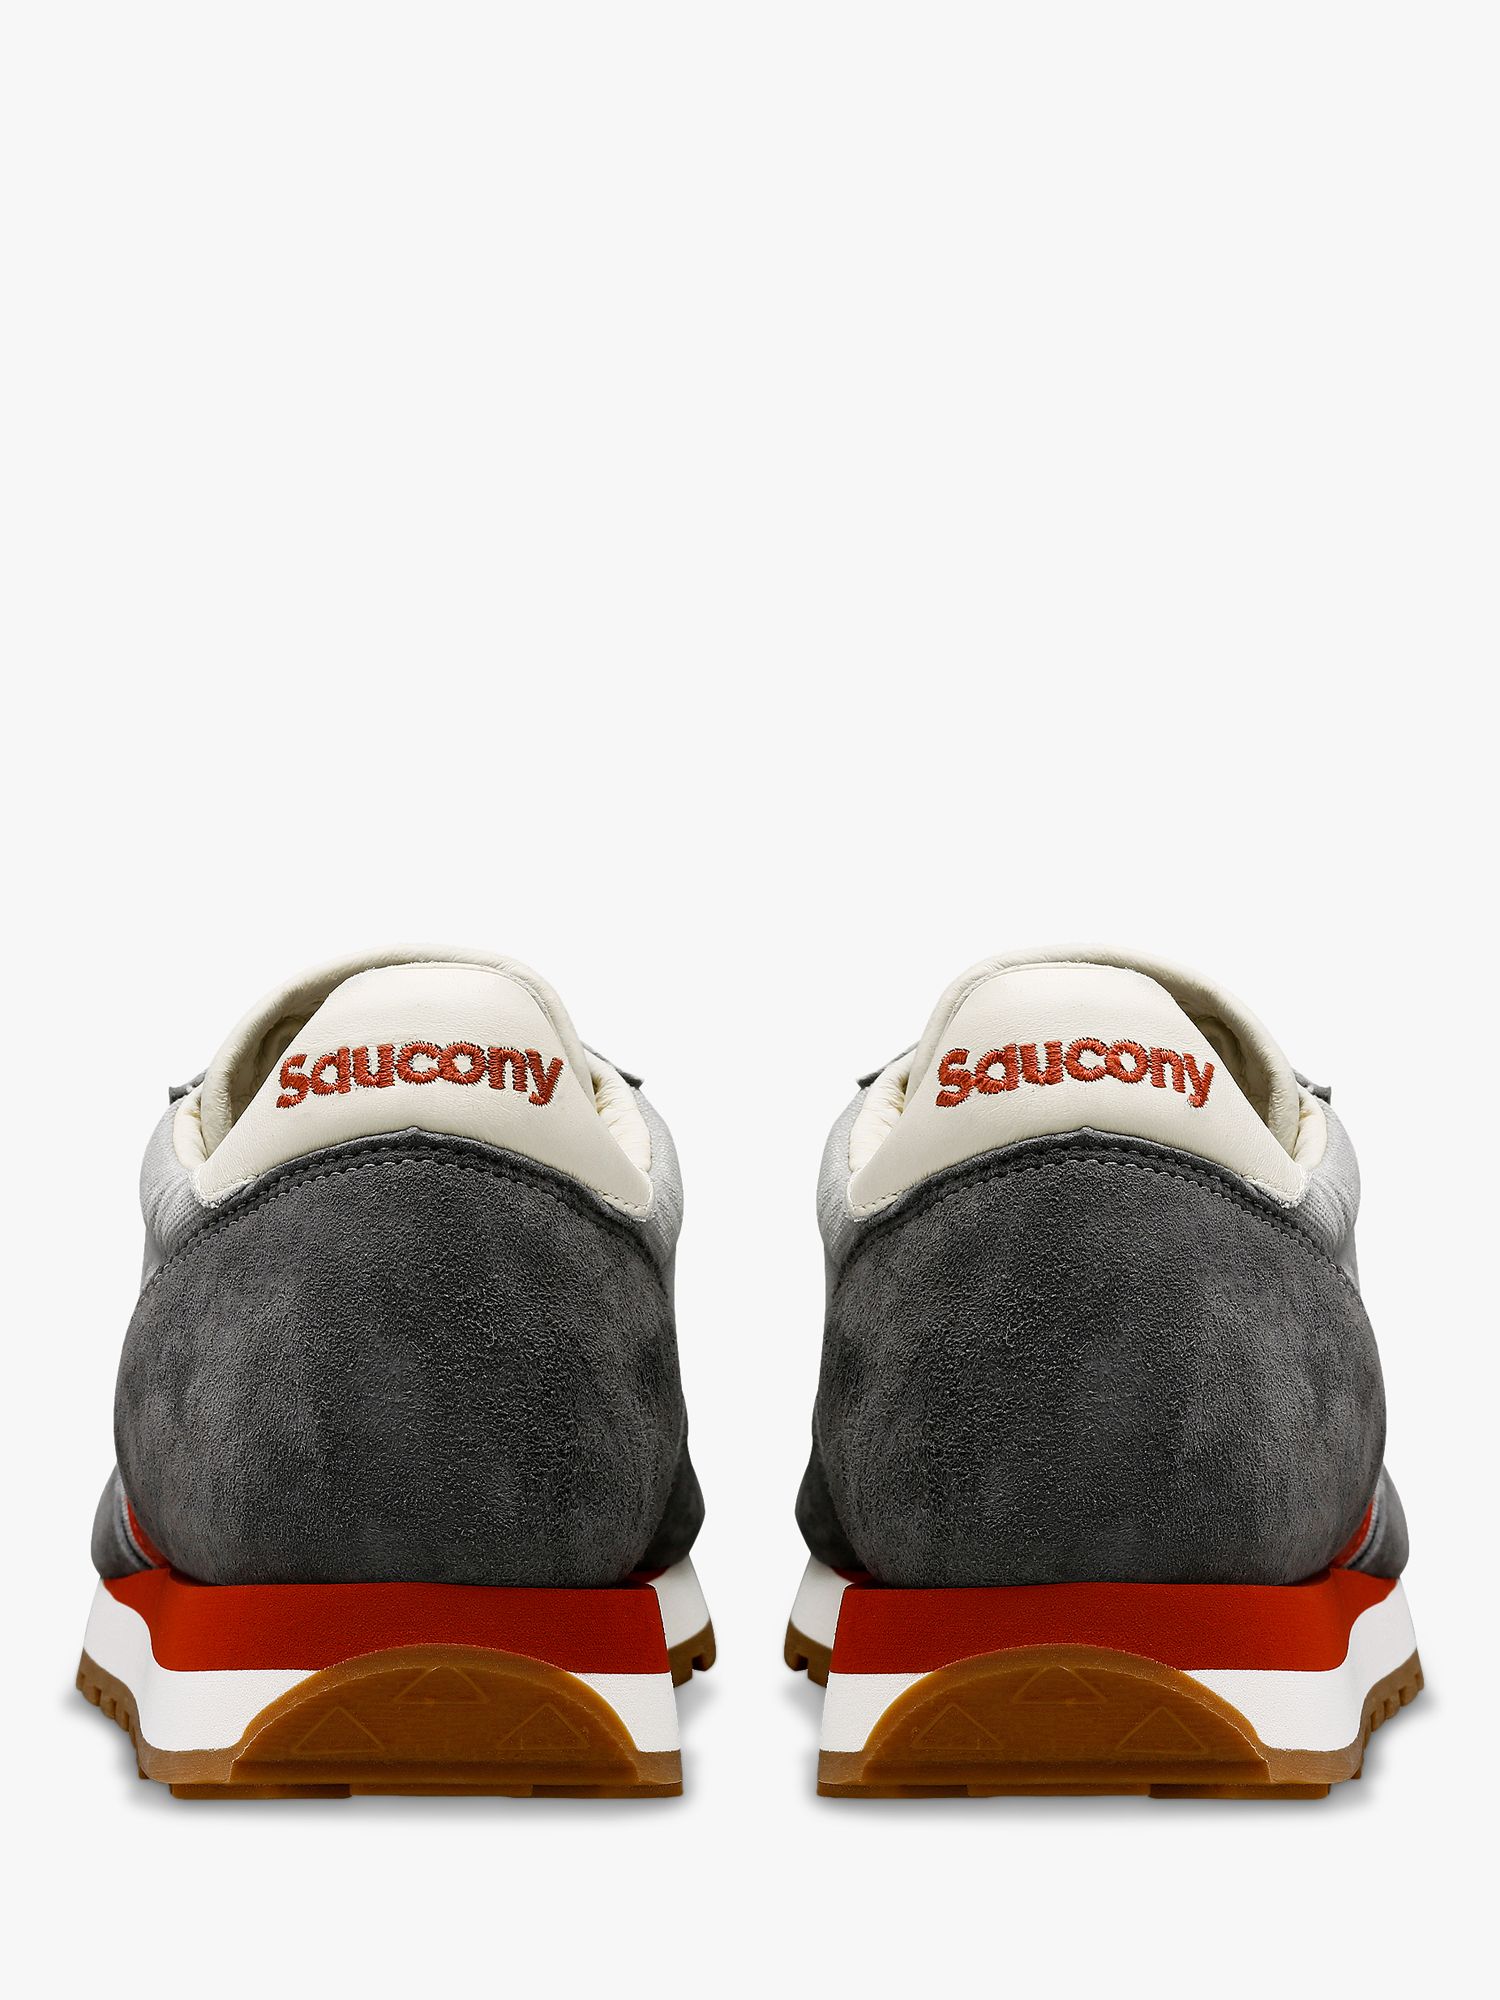 Saucony Jazz Original Lace Up Trainers, Grey/Red, 11